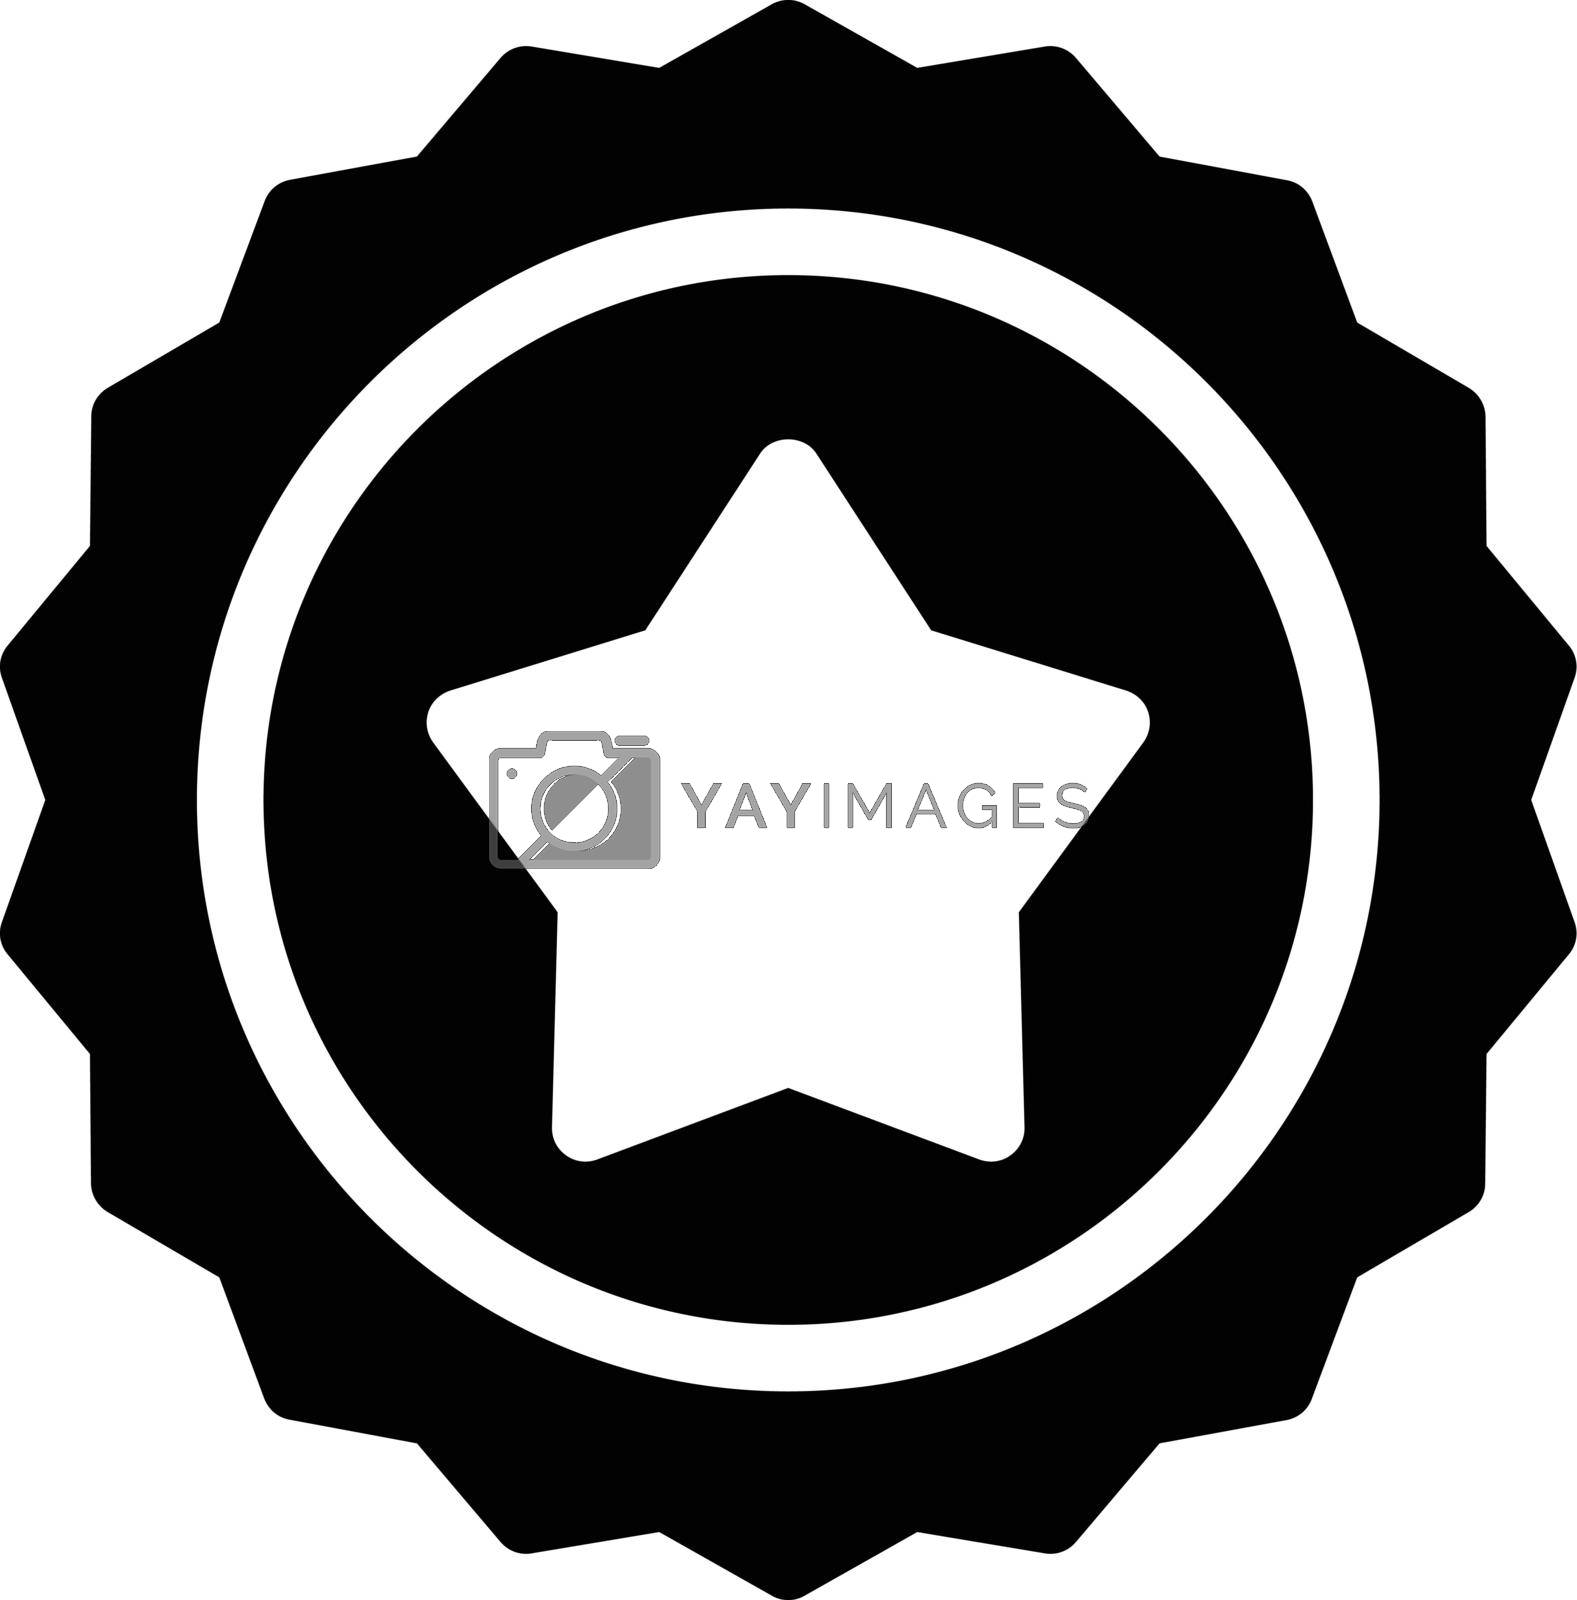 Royalty free image of star by vectorstall